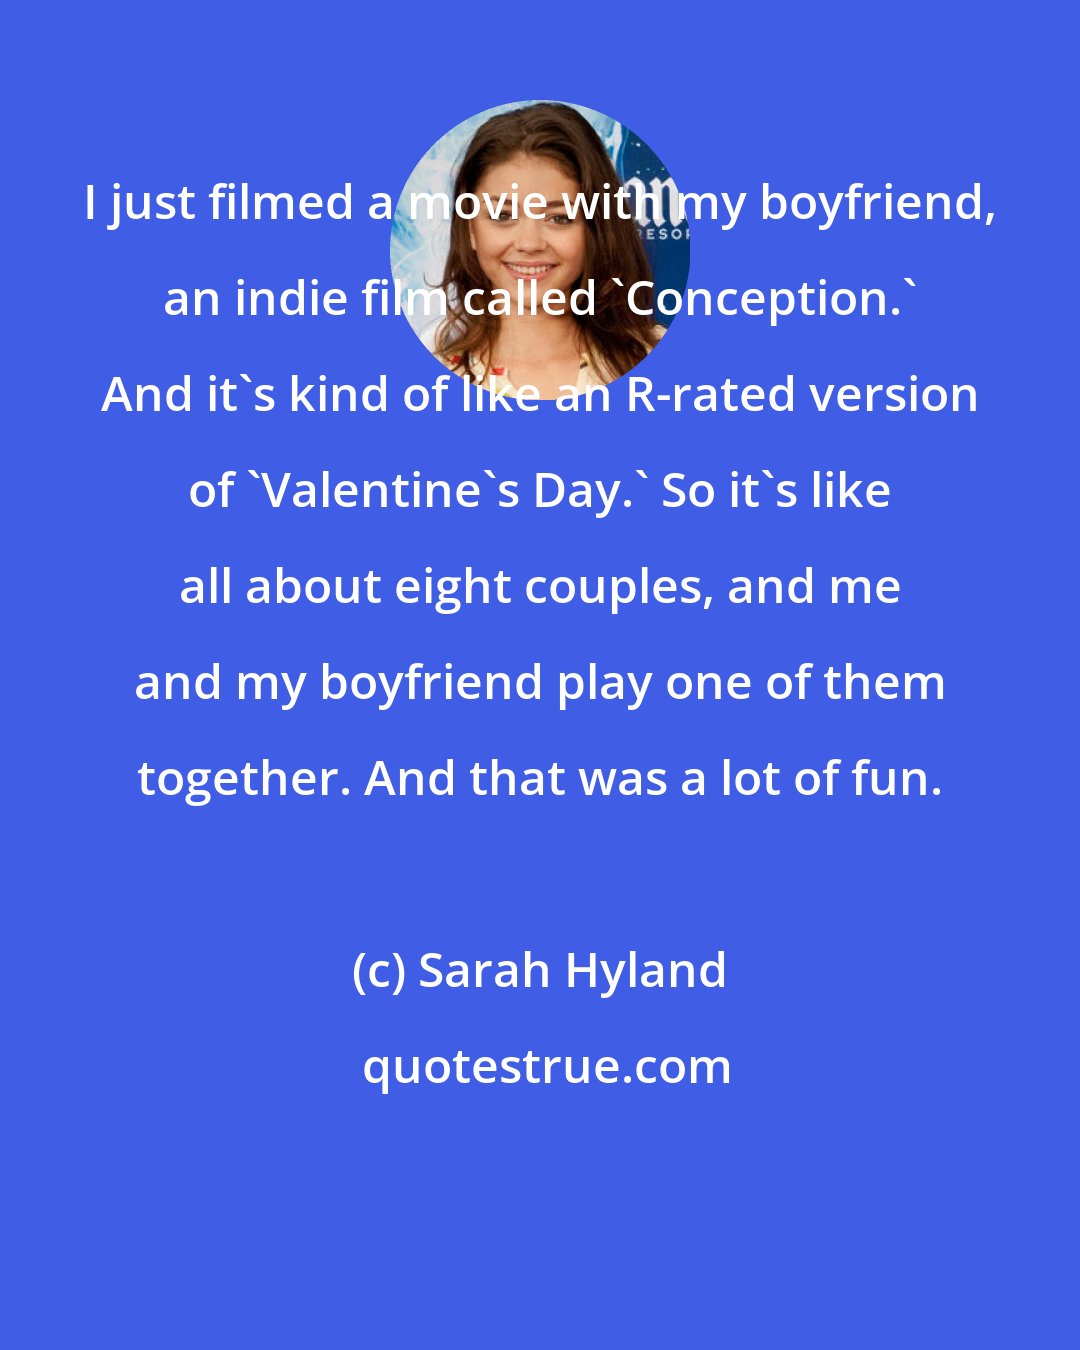 Sarah Hyland: I just filmed a movie with my boyfriend, an indie film called 'Conception.' And it's kind of like an R-rated version of 'Valentine's Day.' So it's like all about eight couples, and me and my boyfriend play one of them together. And that was a lot of fun.